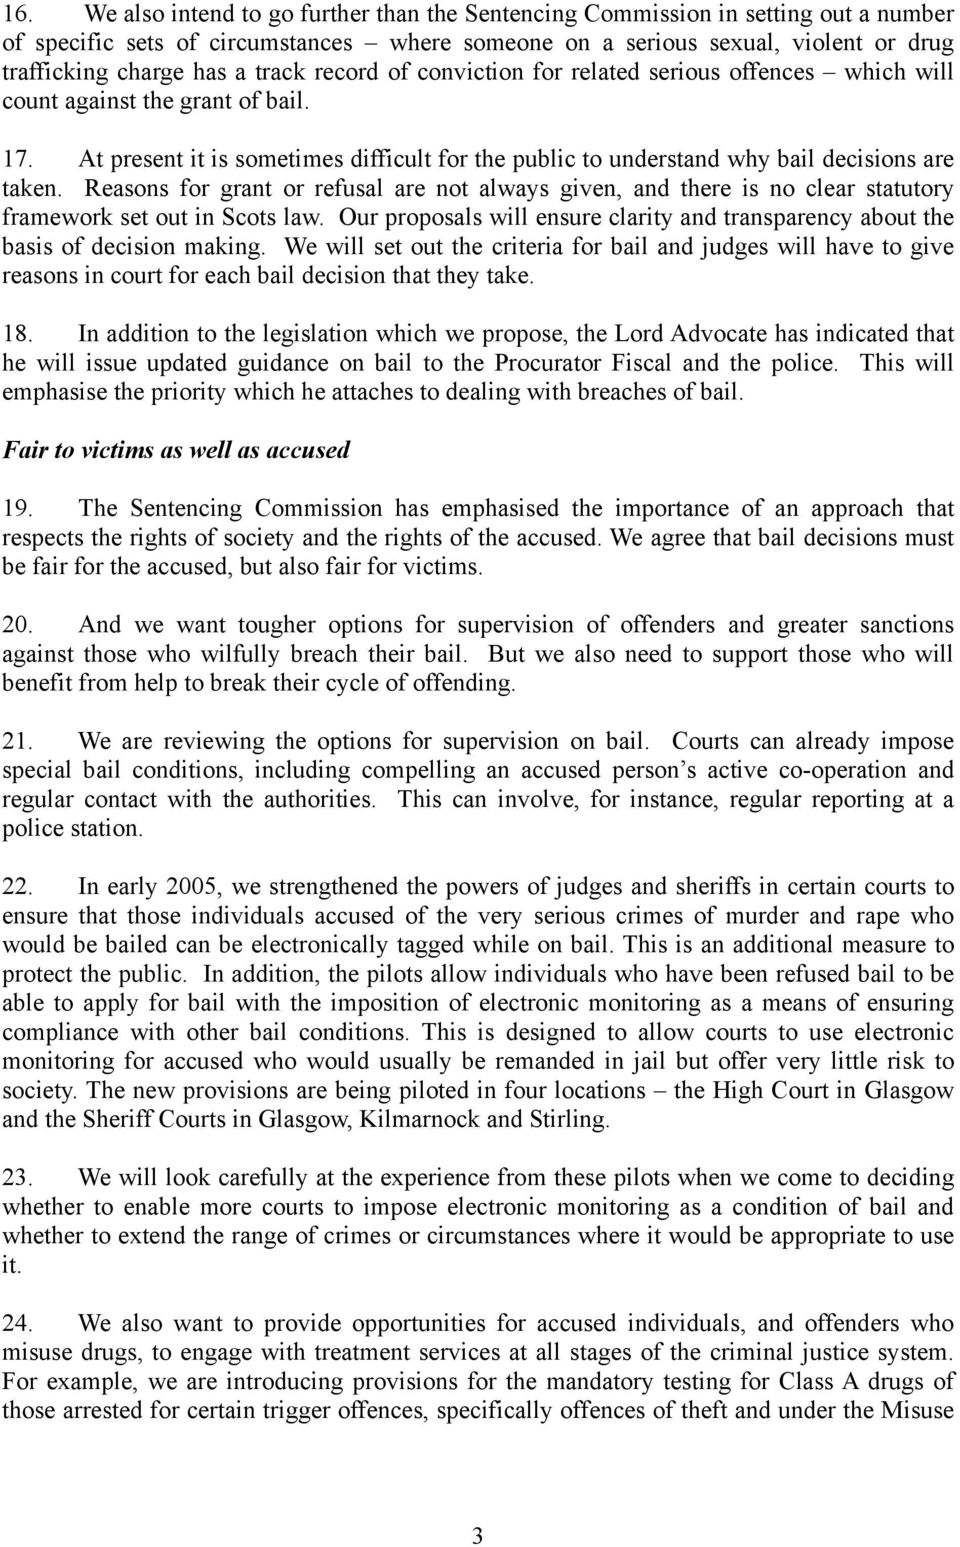 Reasons for grant or refusal are not always given, and there is no clear statutory framework set out in Scots law.